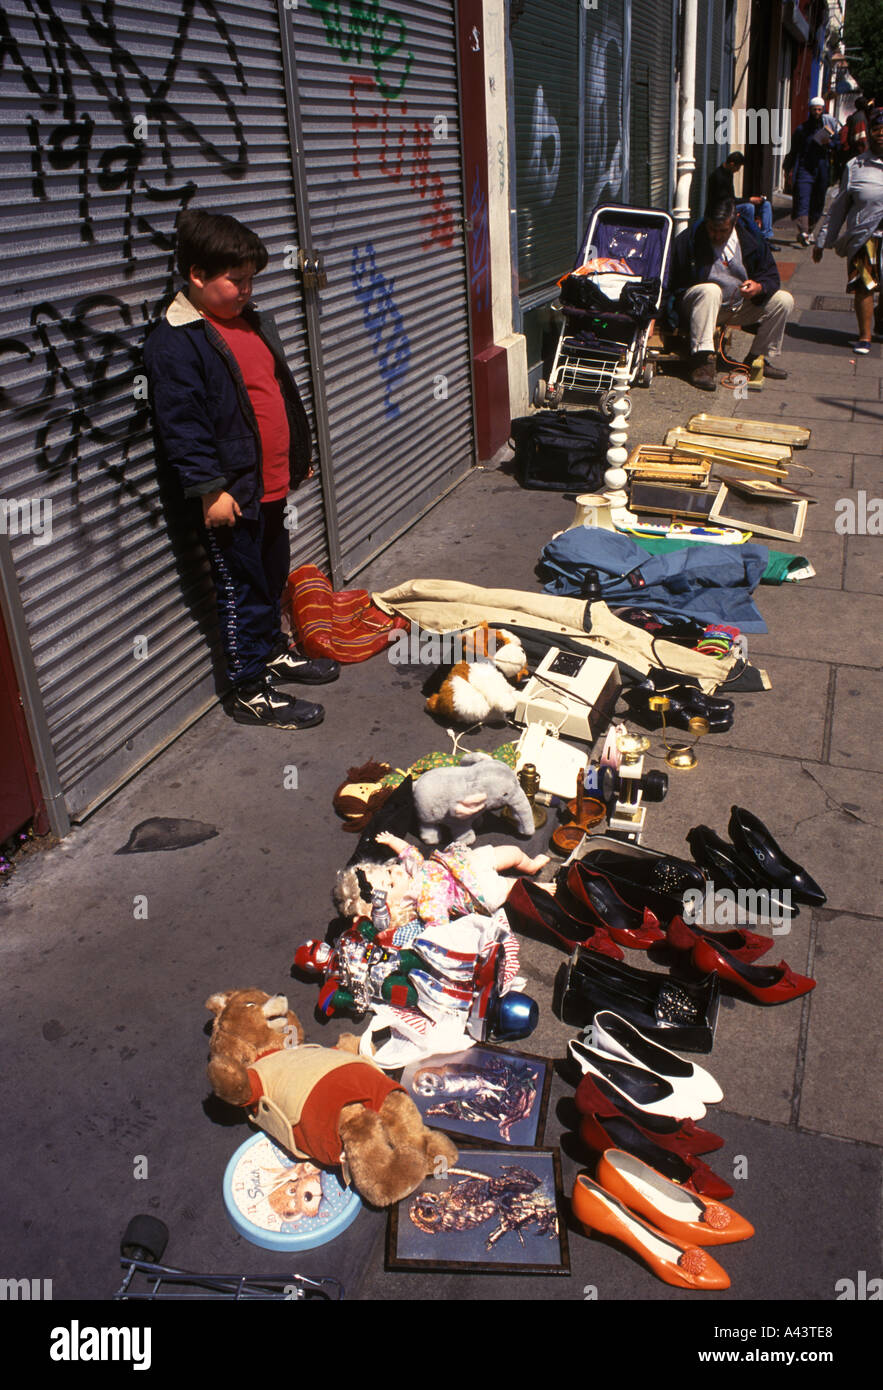 Childhood poverty 1990s,boy selling family unwanted stuff less fashionable poor northern end Portobello Road Notting Hill London UK 1999 HOMER SYKES Stock Photo